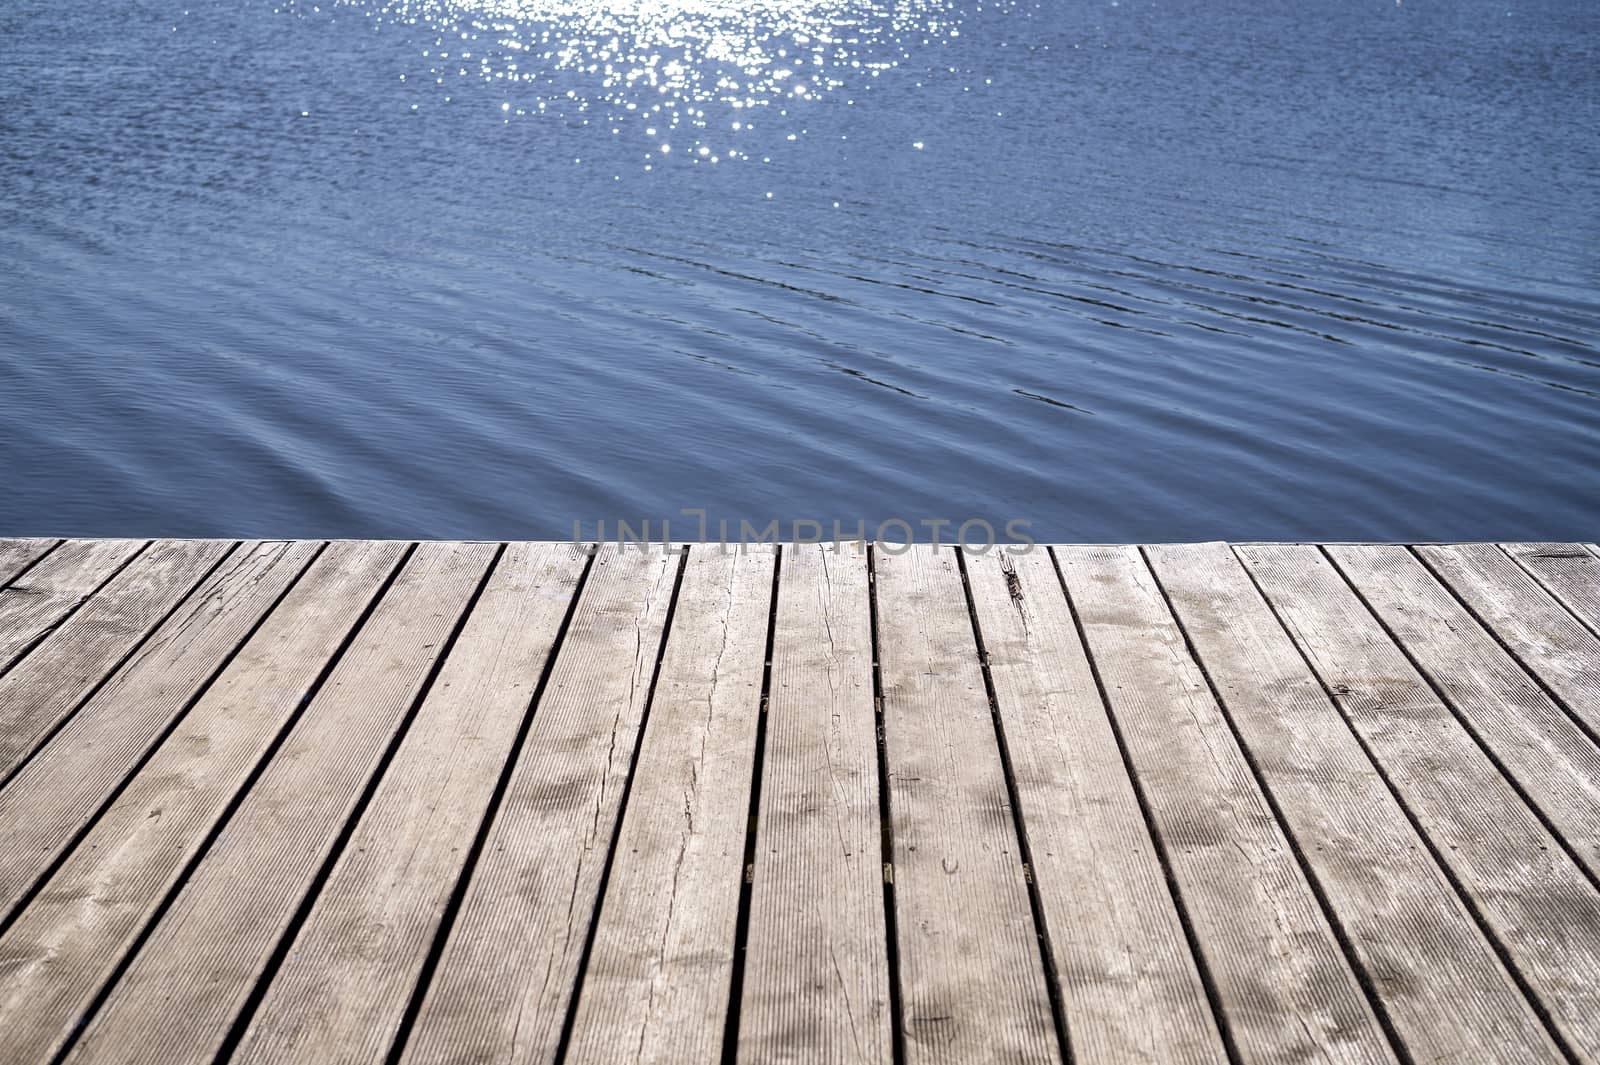 Wooden textured boards of a jetty and reflection of the sun on the water in a low angle view